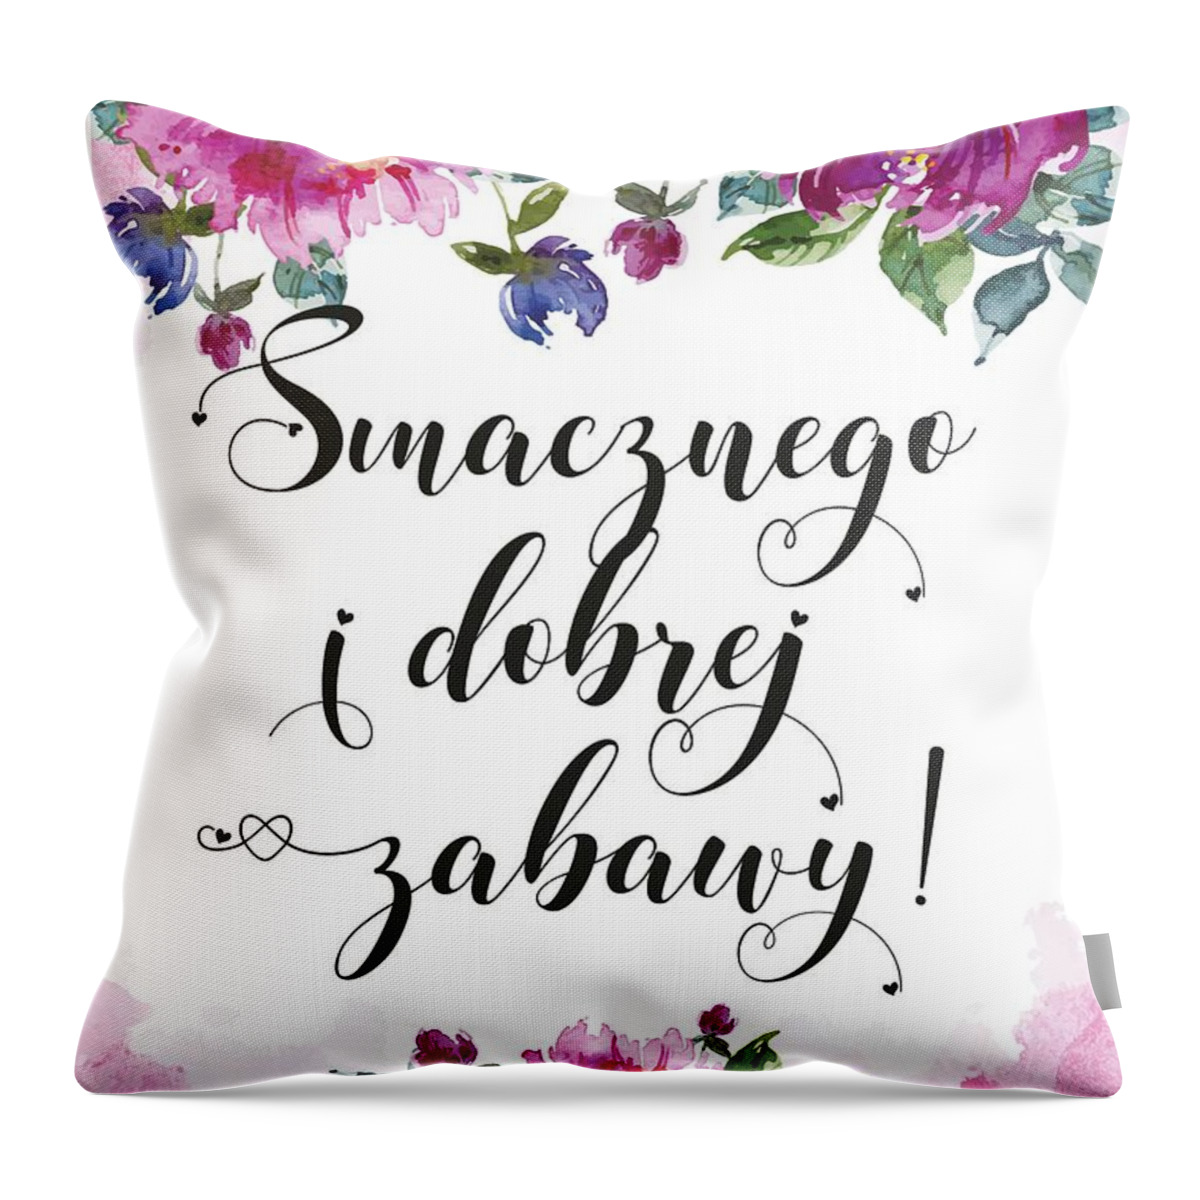 Polish Wedding Throw Pillow featuring the digital art Polish Wedding Welcome Sign Party Event Decor by Magdalena Walulik